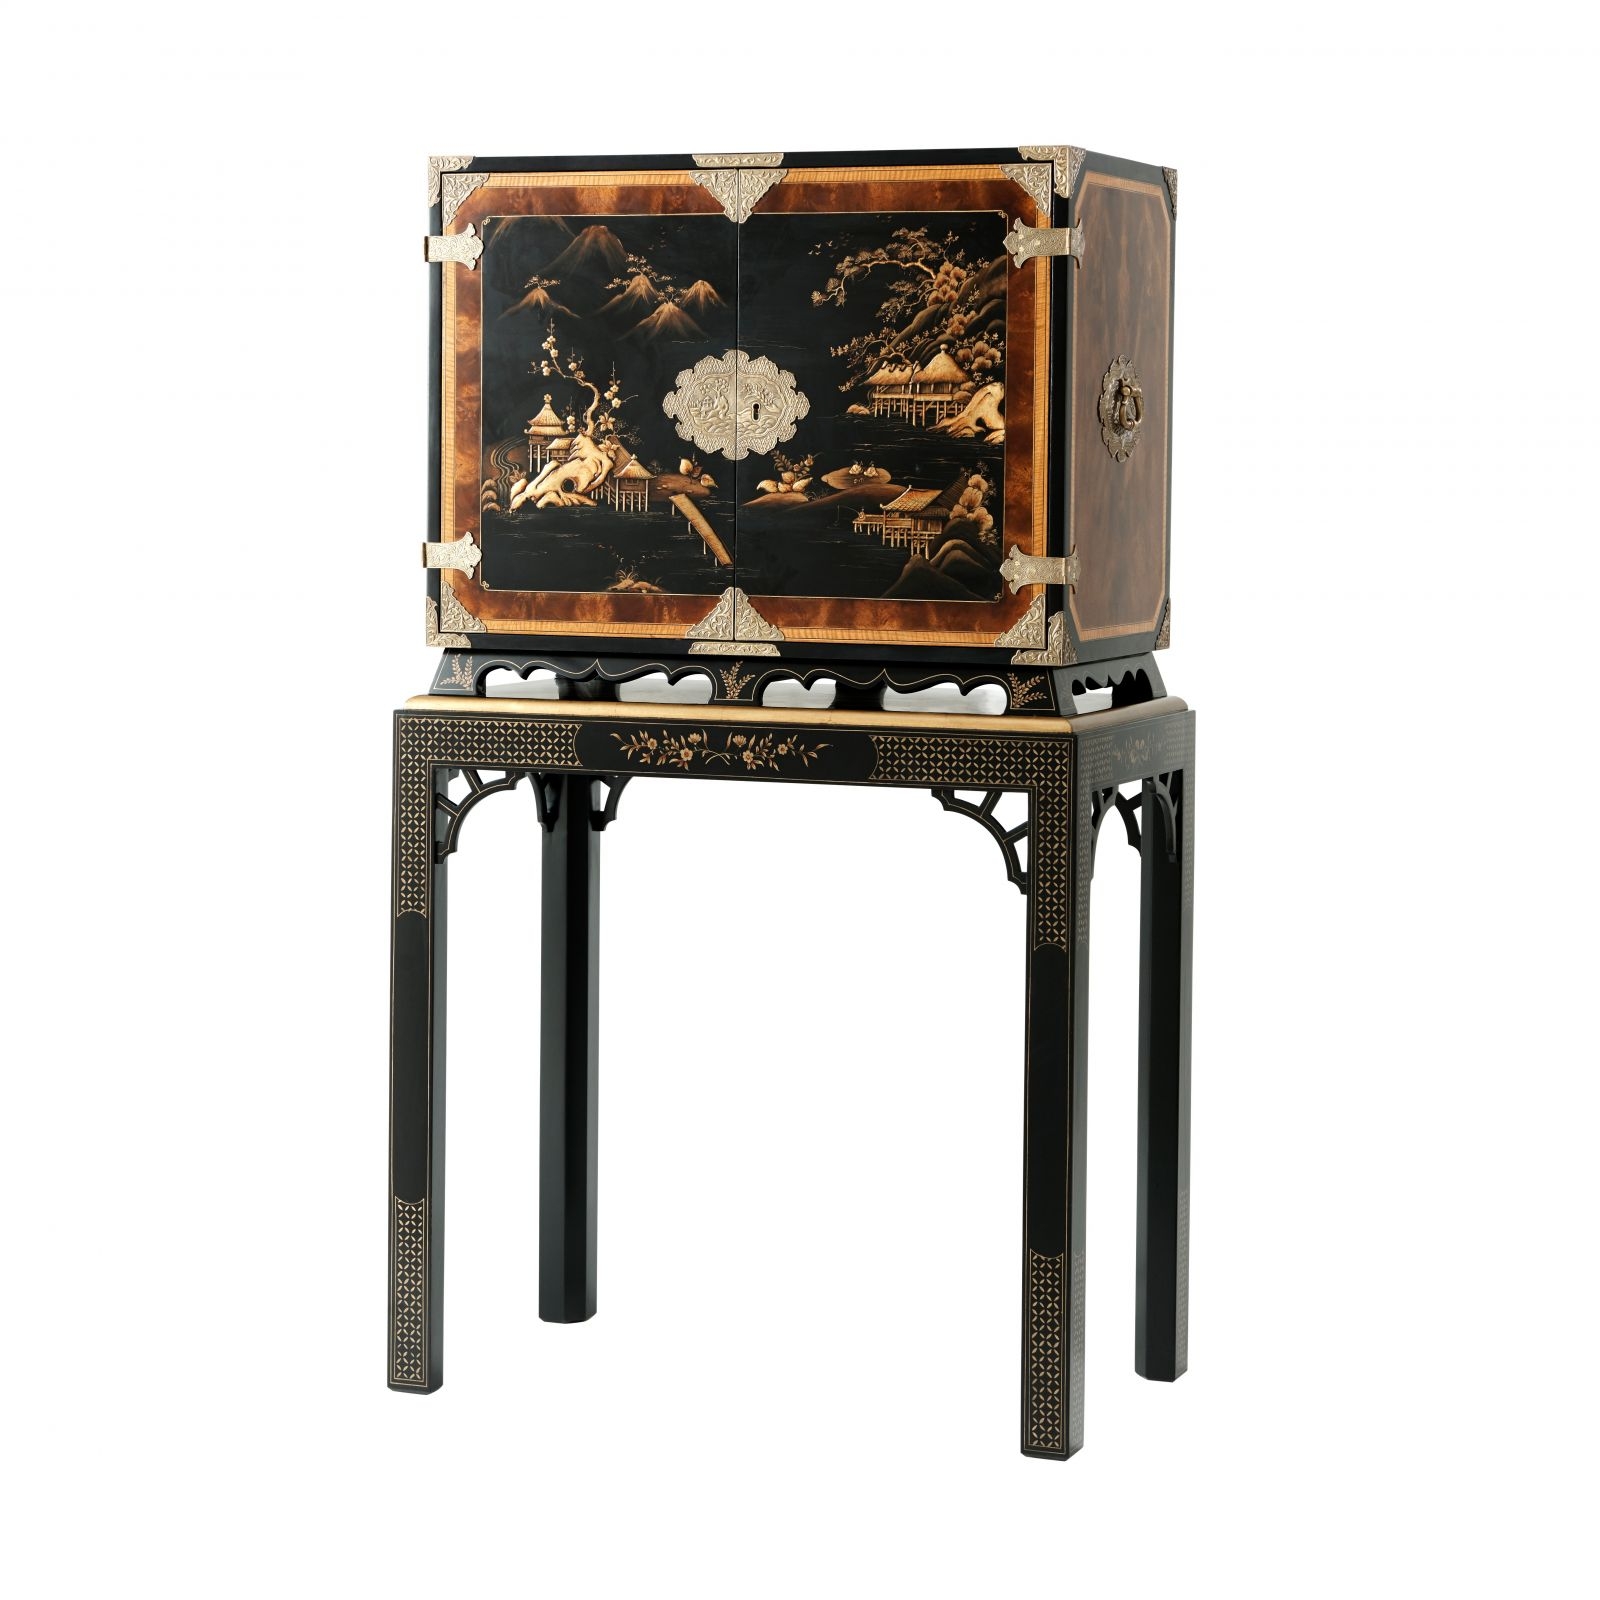 Theodore Alexander Black Lacquered Chinoiserie Bar or Drinks Cabinet with Hand-Painted Chinese Decoration